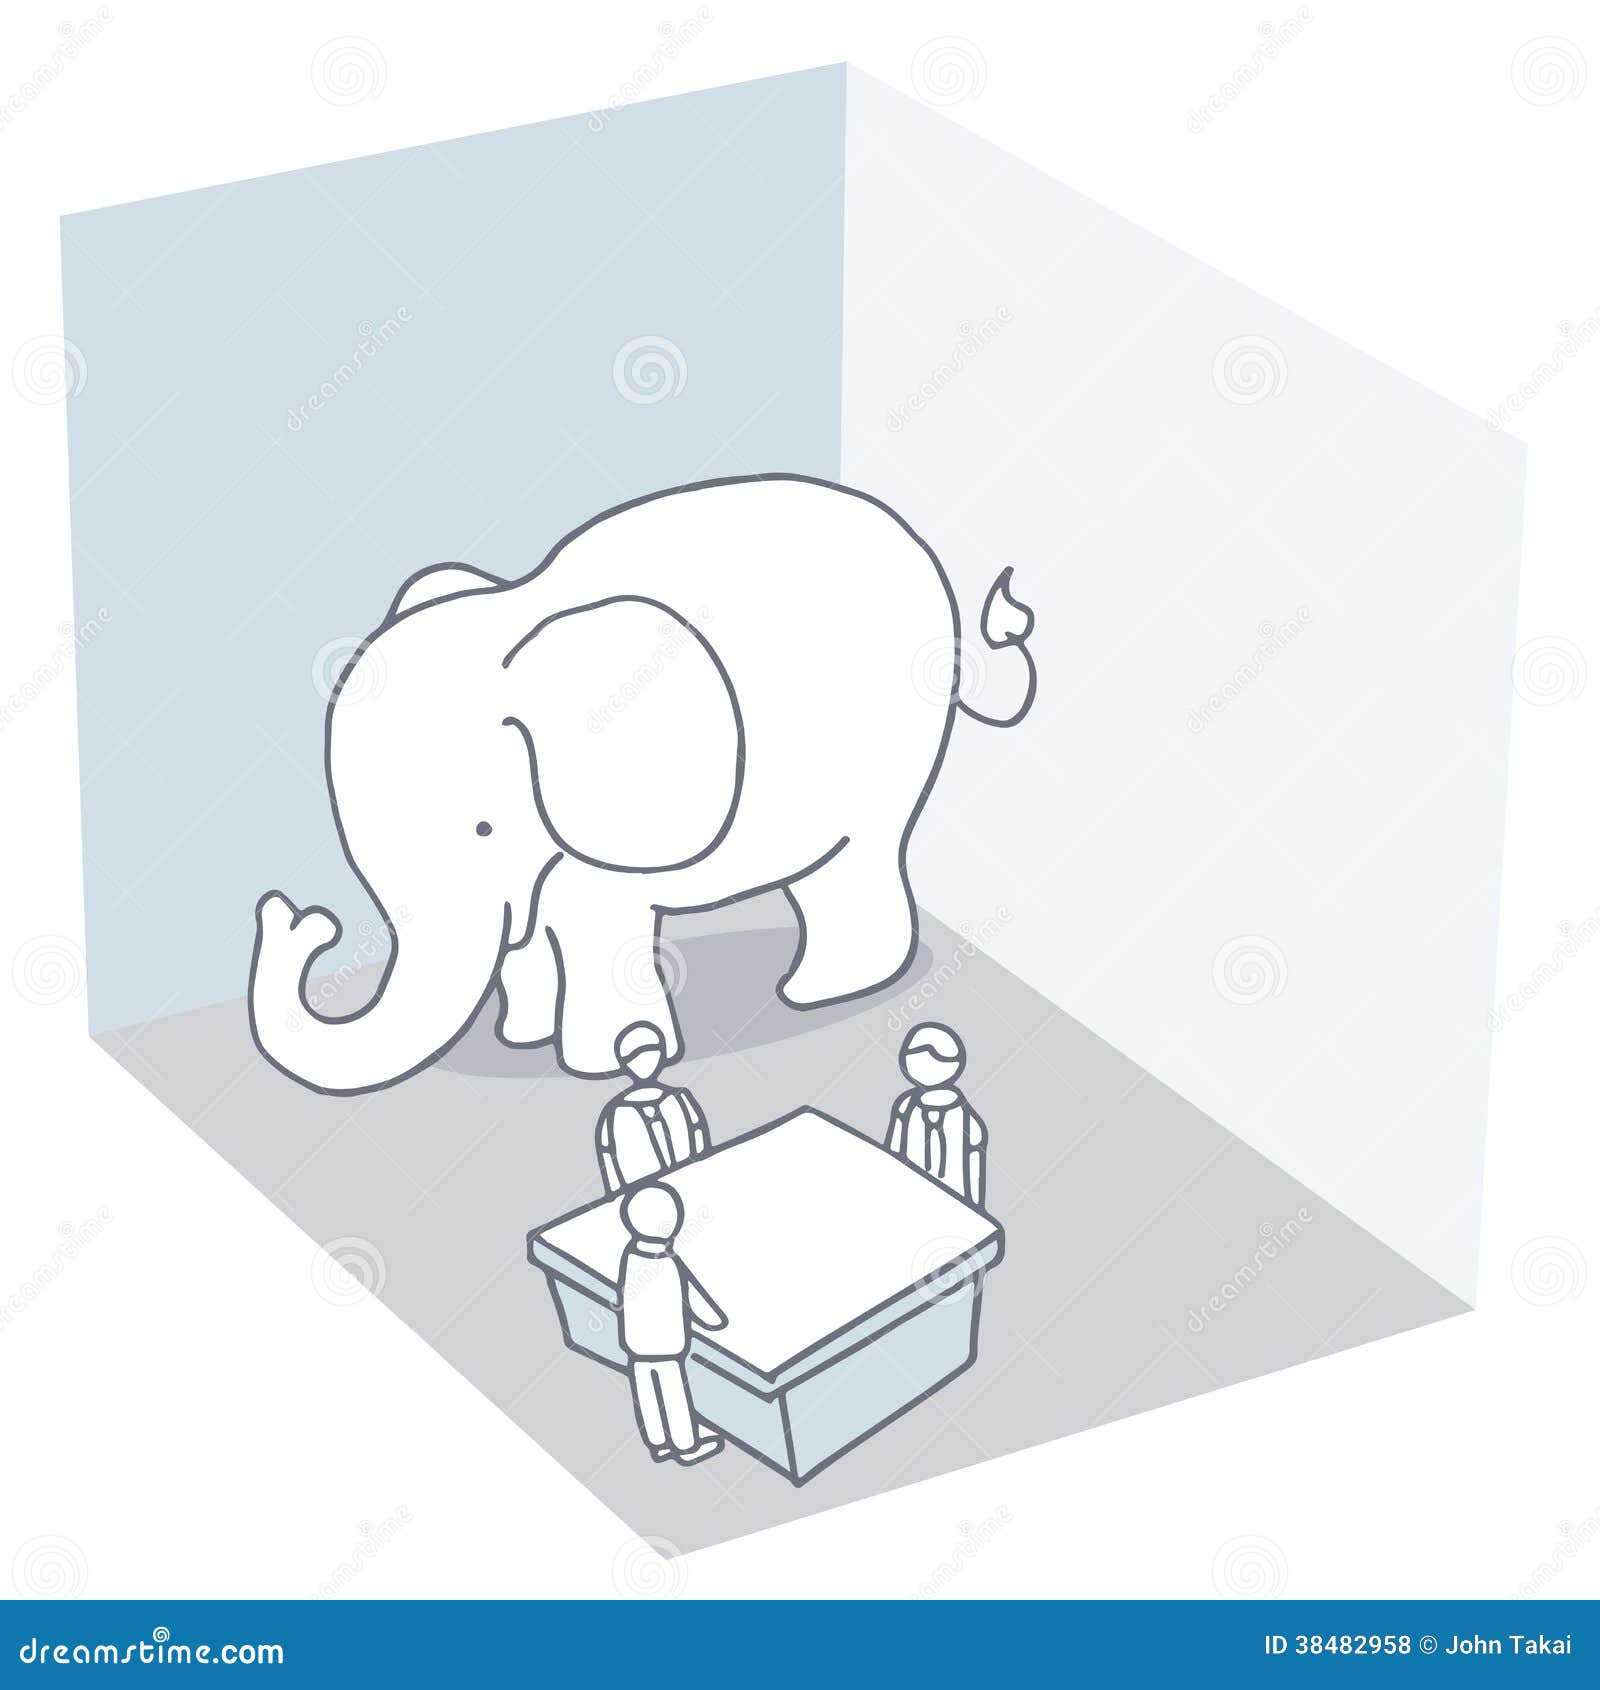 free elephant in the room clipart - photo #1